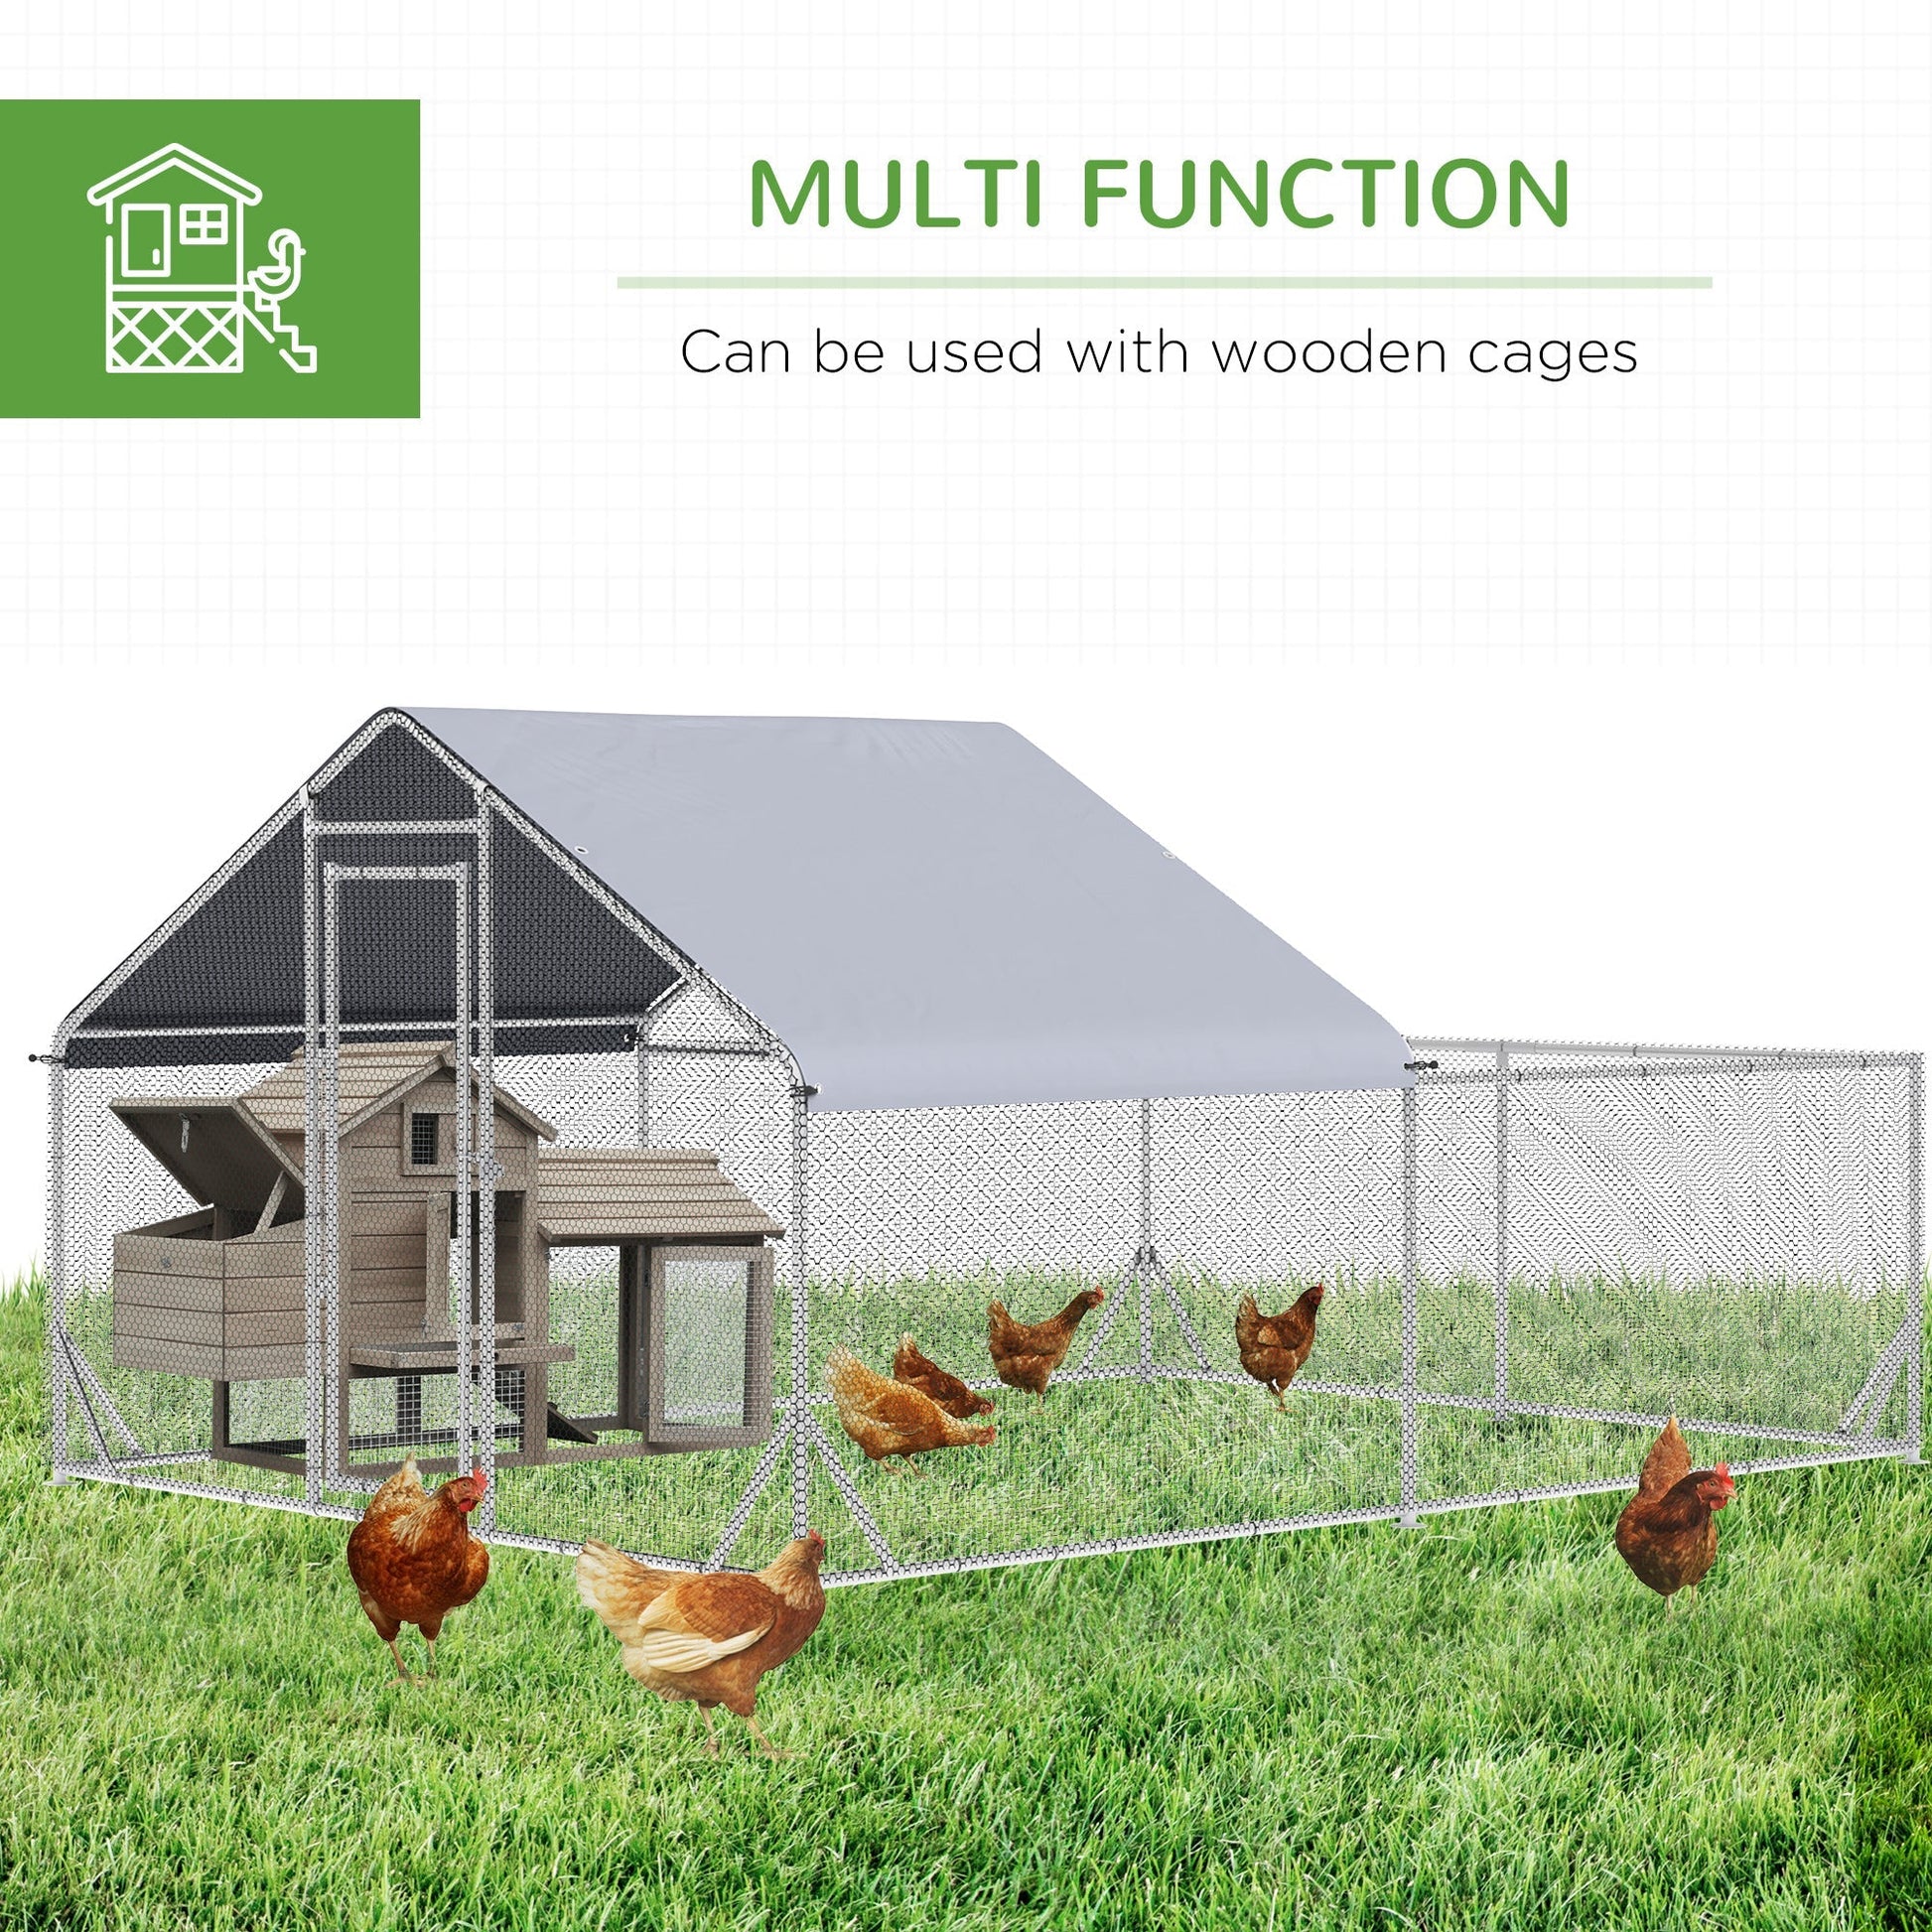 Large Metal Chicken Coop, Hen Run House with Anti-Ultraviolet Cover, Walk-in Poultry Cage for Ducks, Rabbits, Outdoor Backyard Farm, 13.1' x 9.8' x 6.4' at Gallery Canada